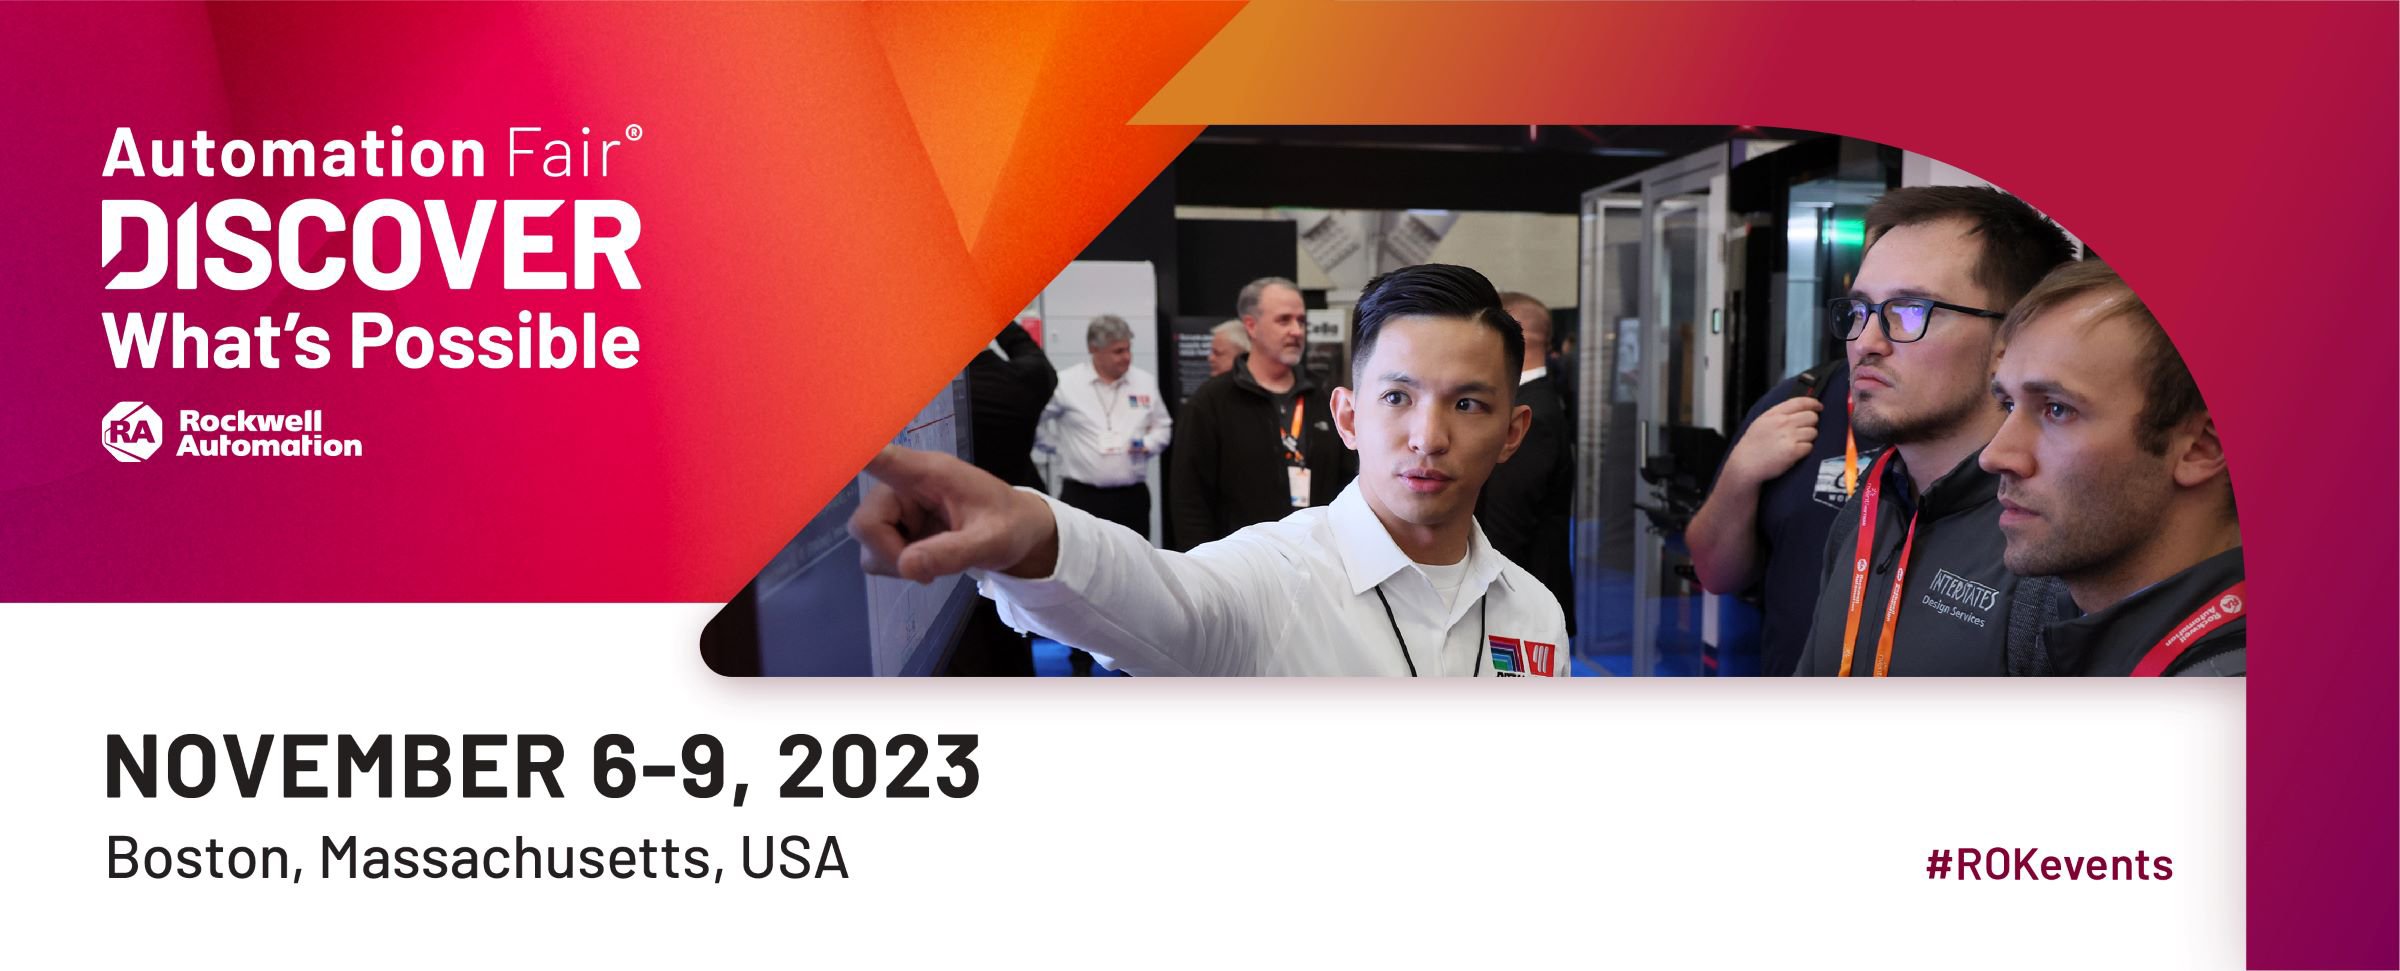 Automation Fair 2023 - Discover What's Possible